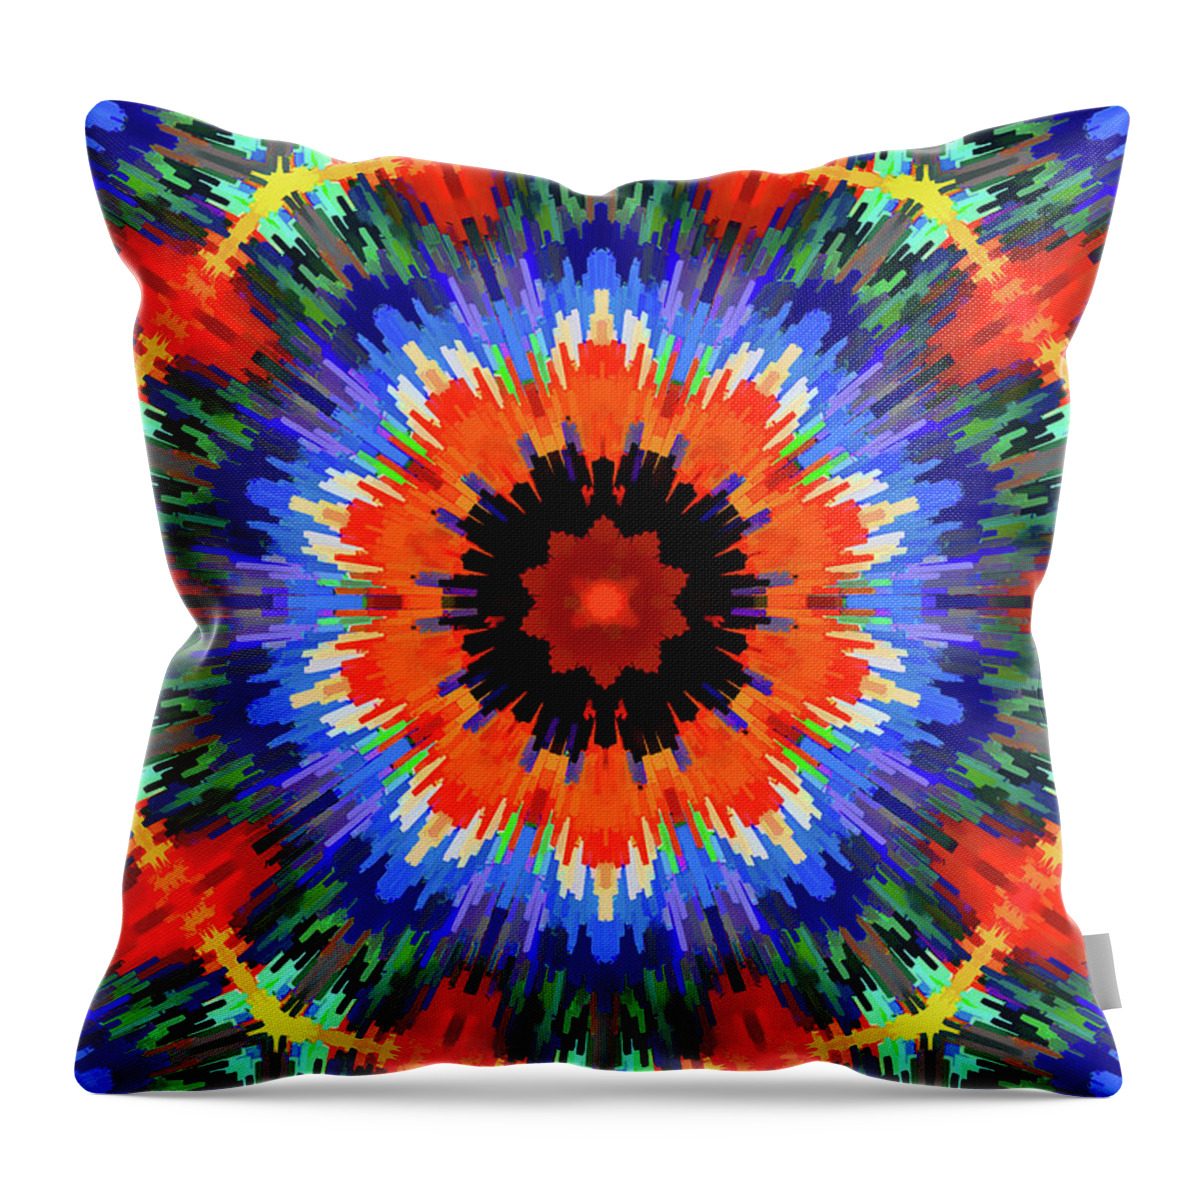 Mandala Art Throw Pillow featuring the painting Receives by Jeelan Clark